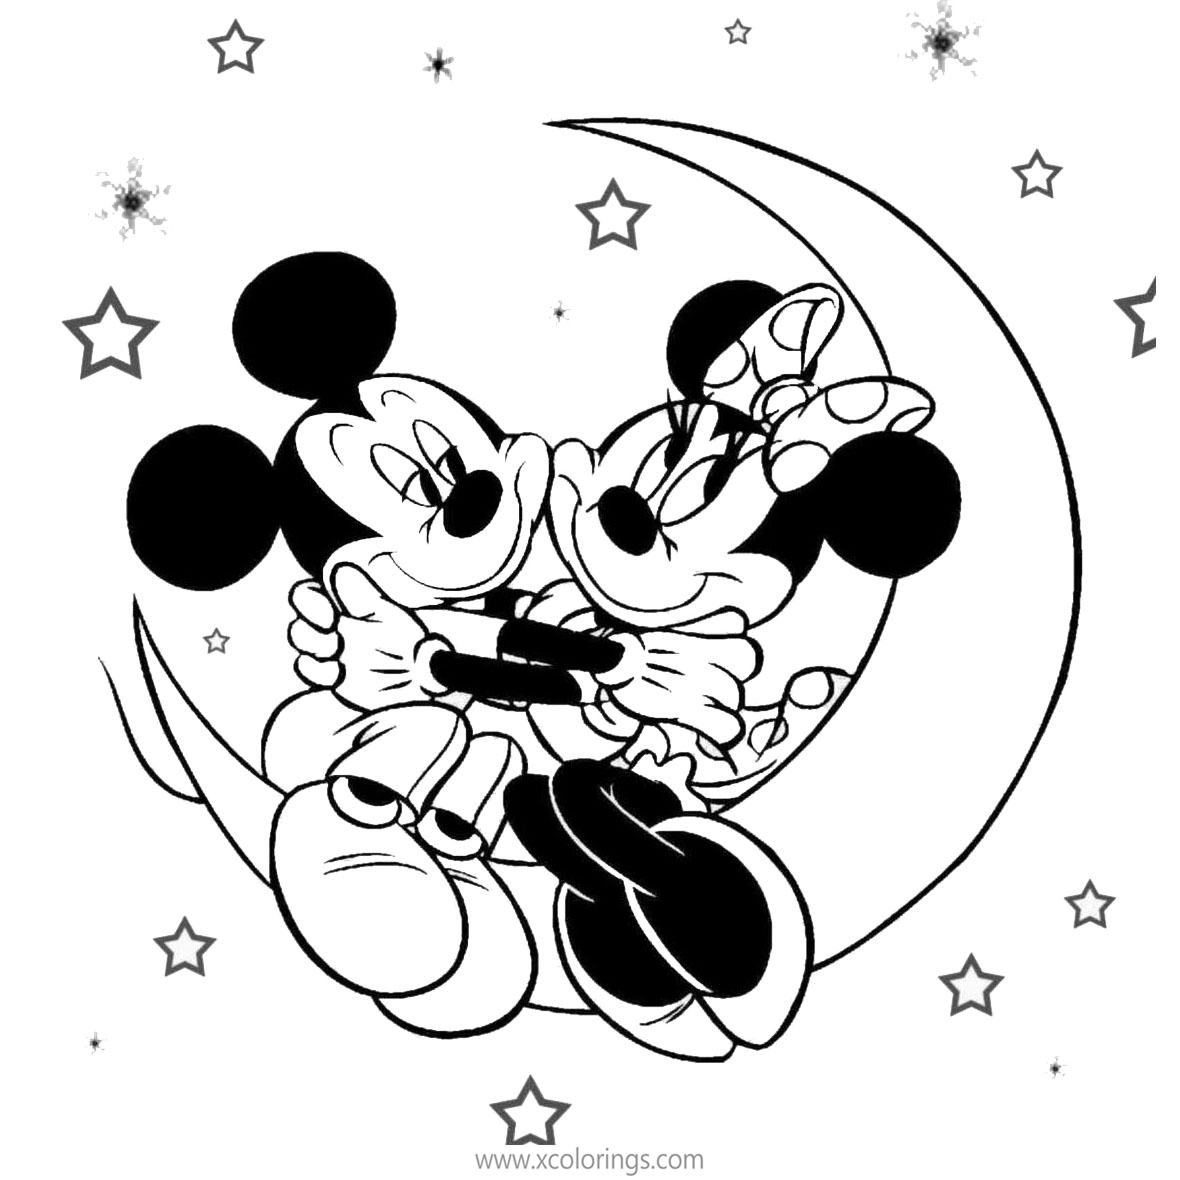 Free Disney Valentines Coloring Pages Mickey and Minnie Mouse printable